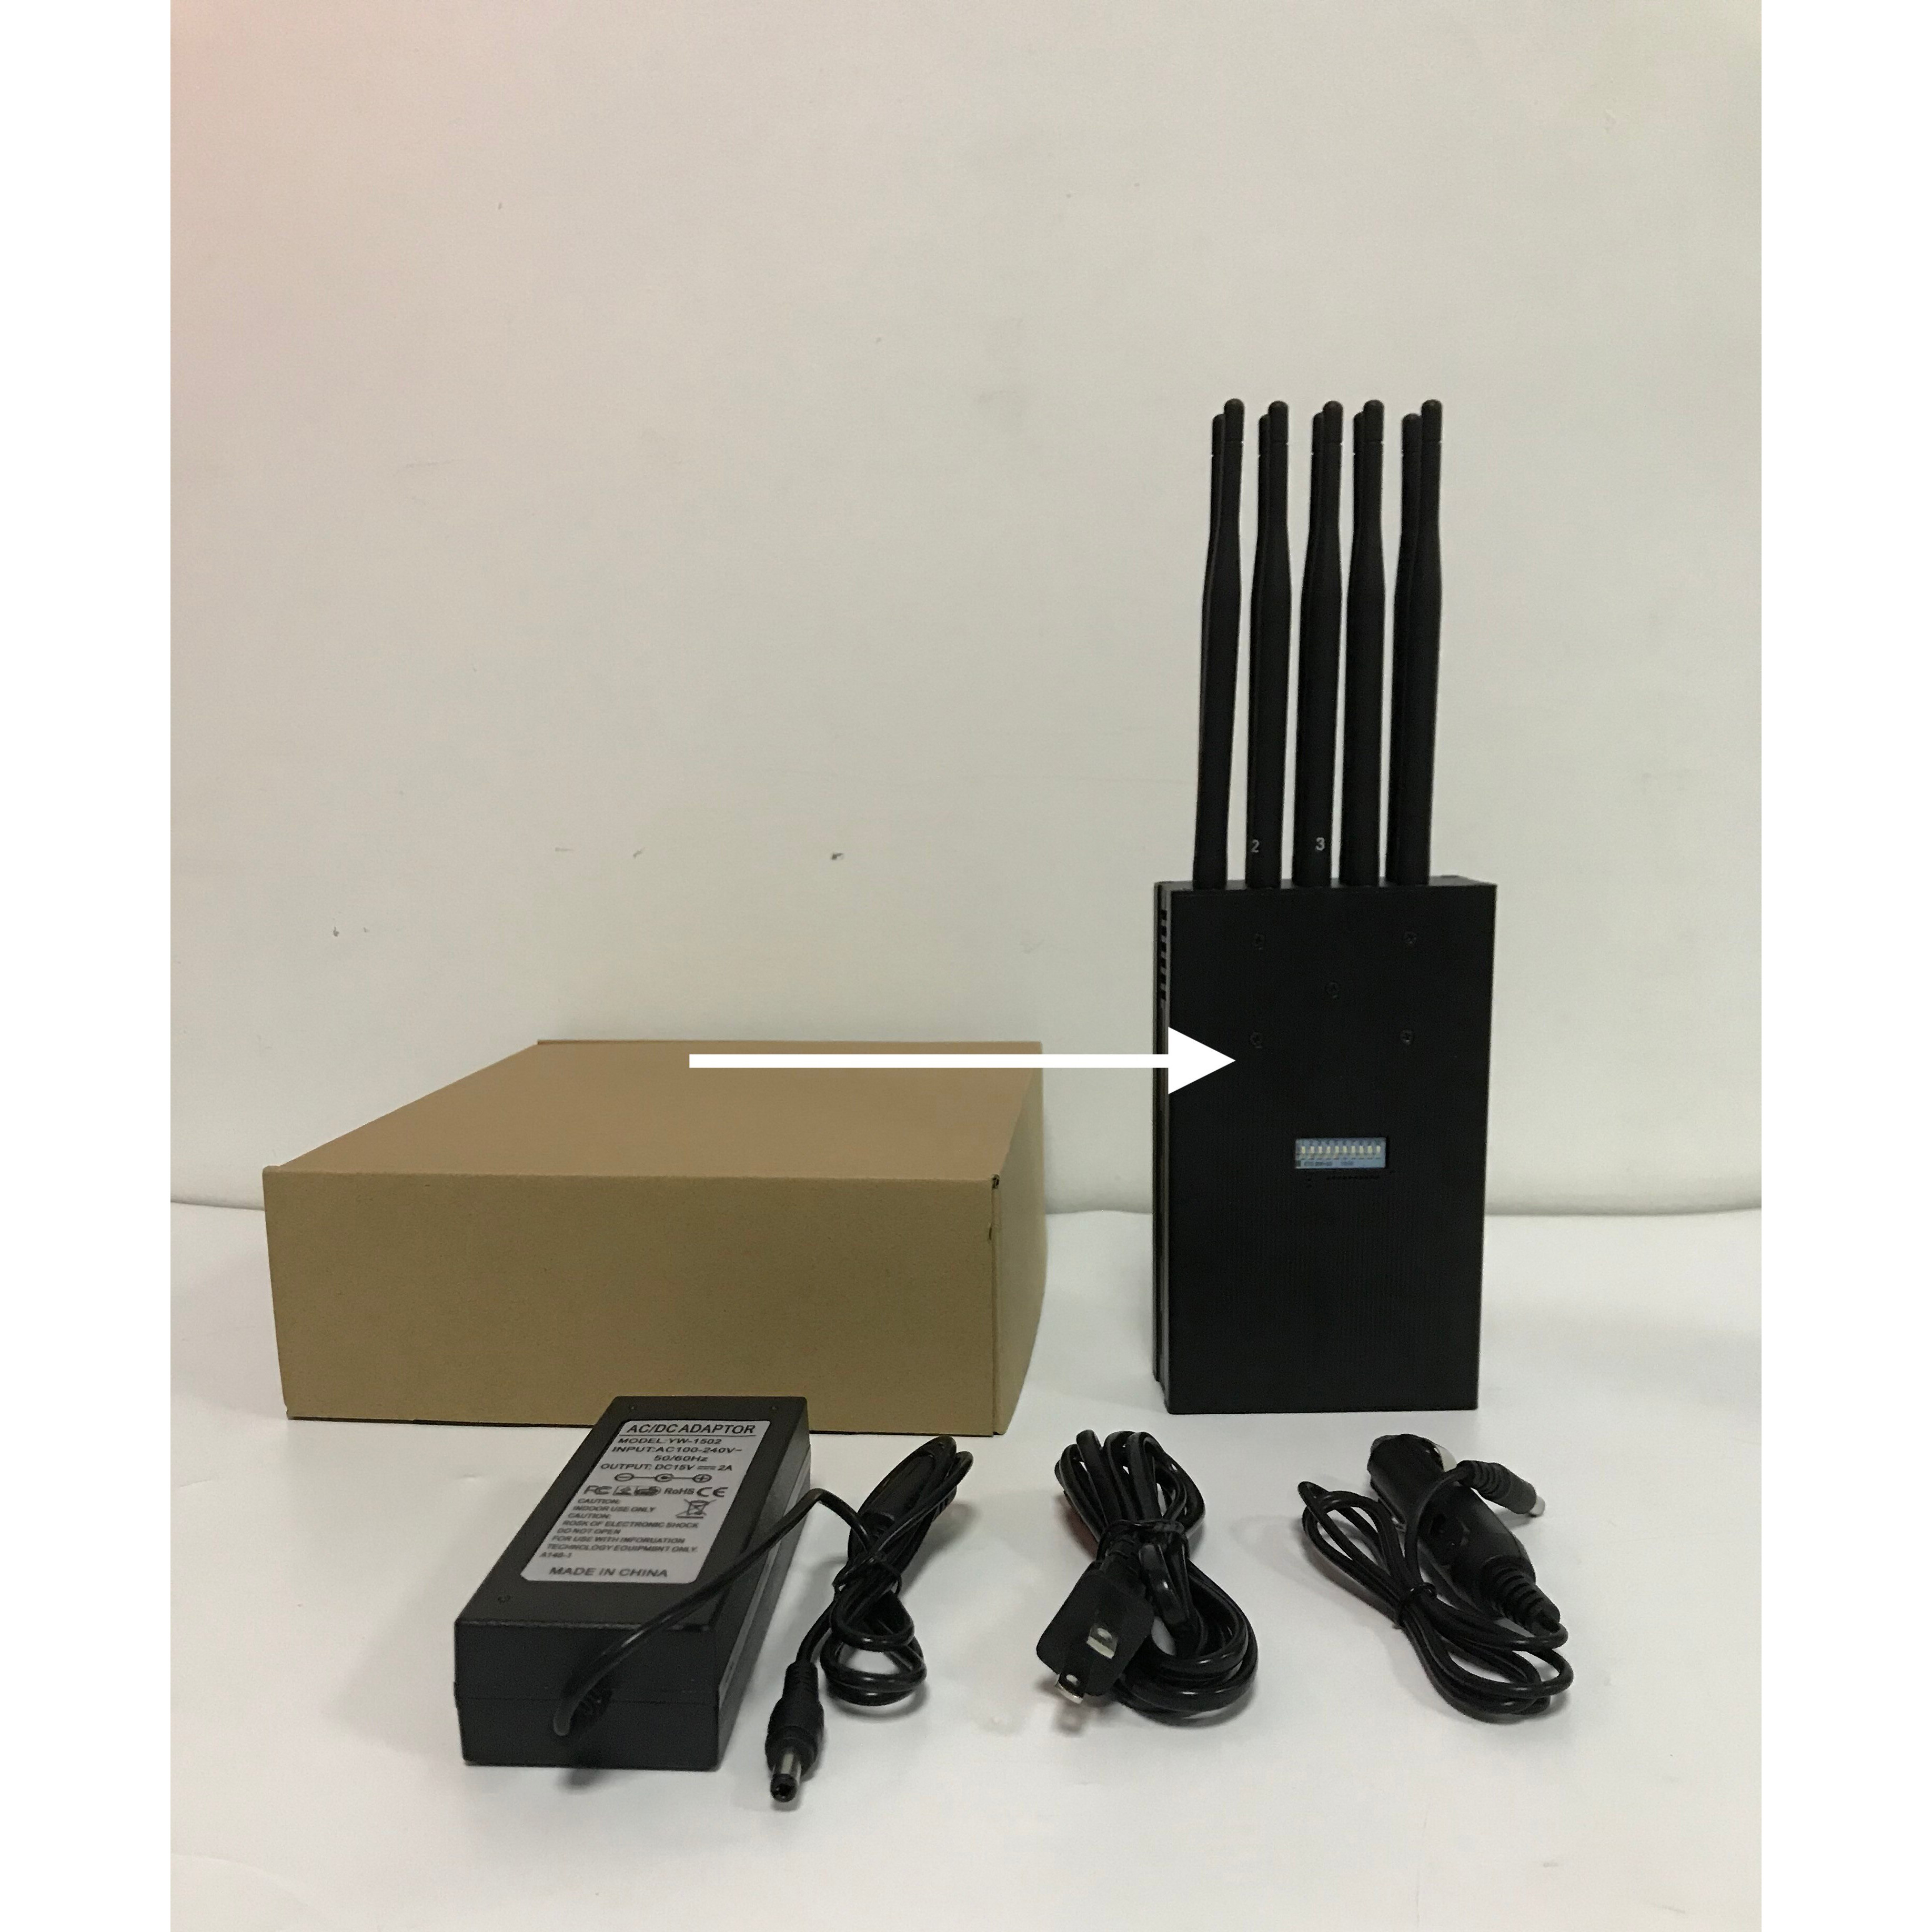 mobile signal jammer 